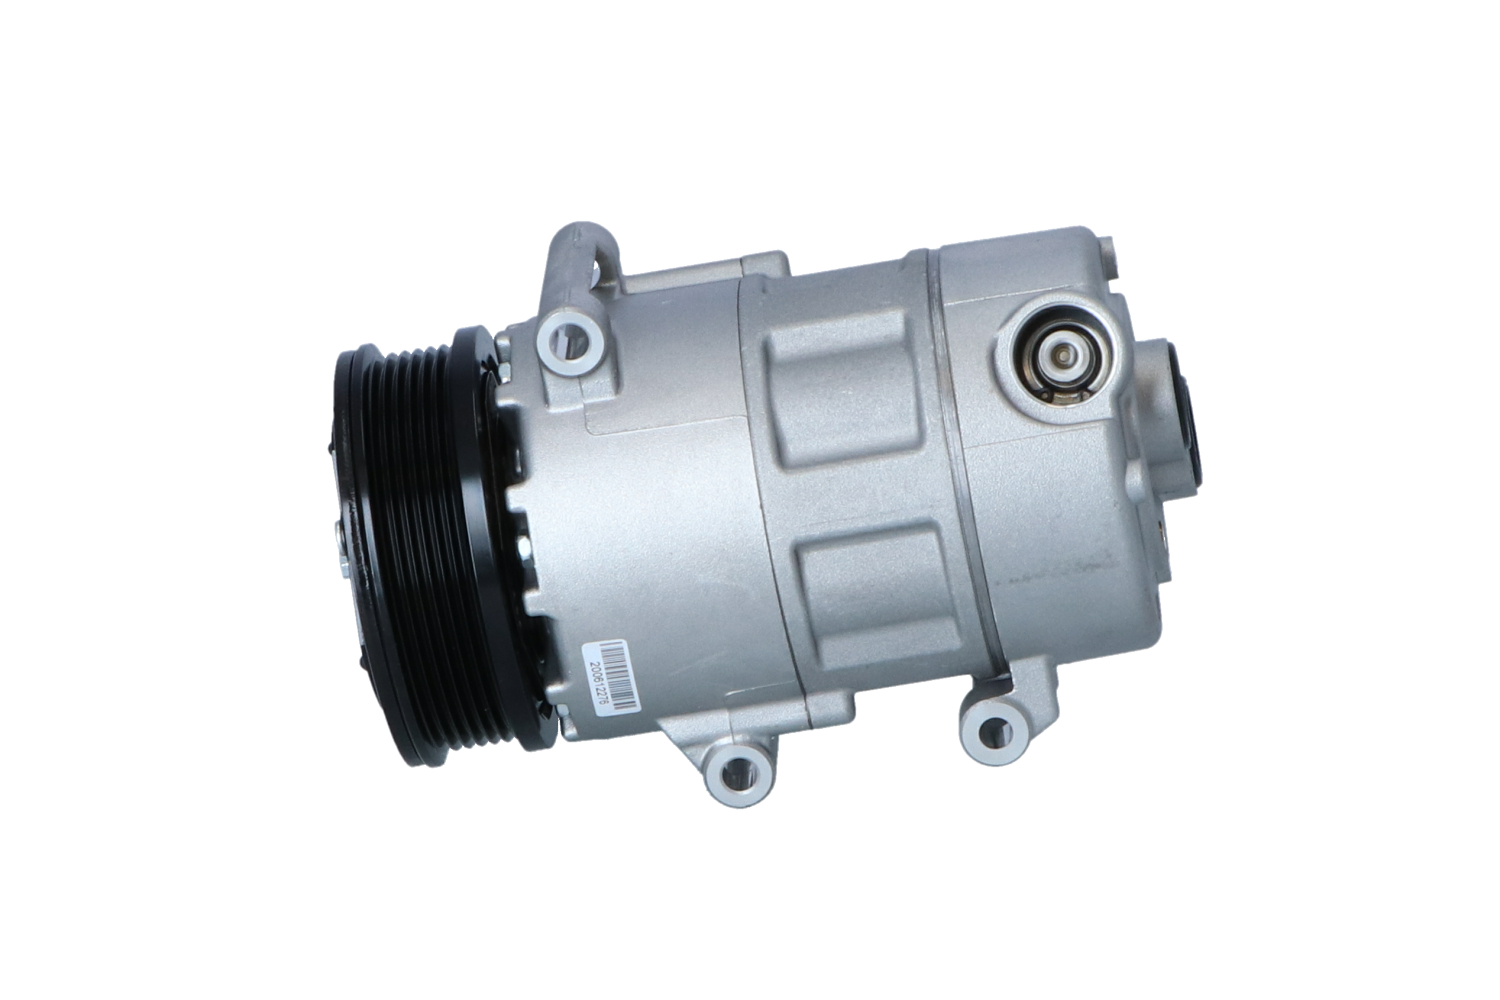 Ac compressor NRF EASY FIT VS16, 12V, PAG 46 YF, with PAG compressor oil, with seal ring - 32403